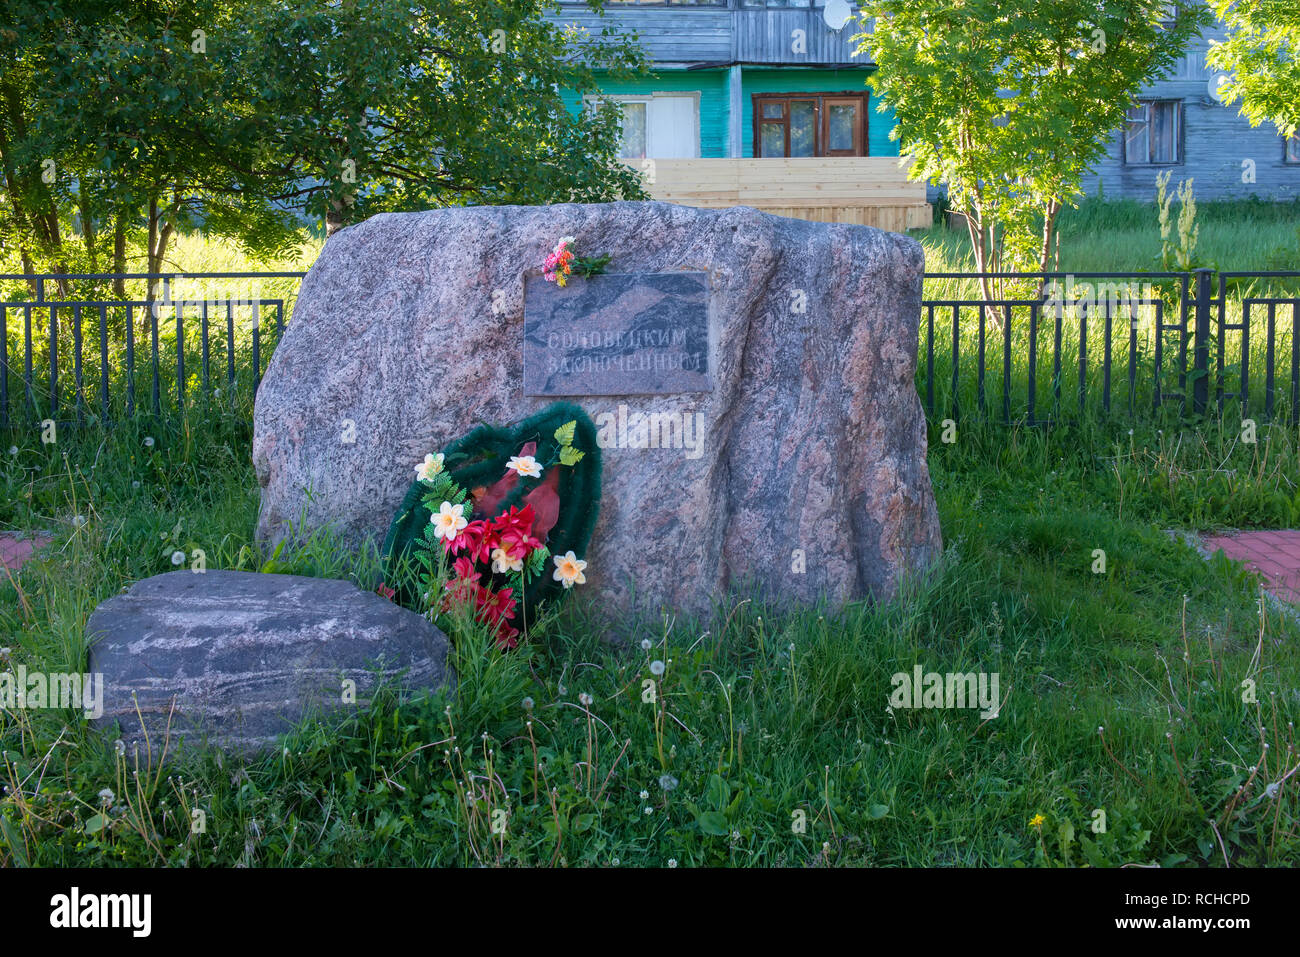 Monument to the "The memory of Solovetsky prisoners". Russia, Arkhangelsk region, Primorsky district, Solovki Stock Photo